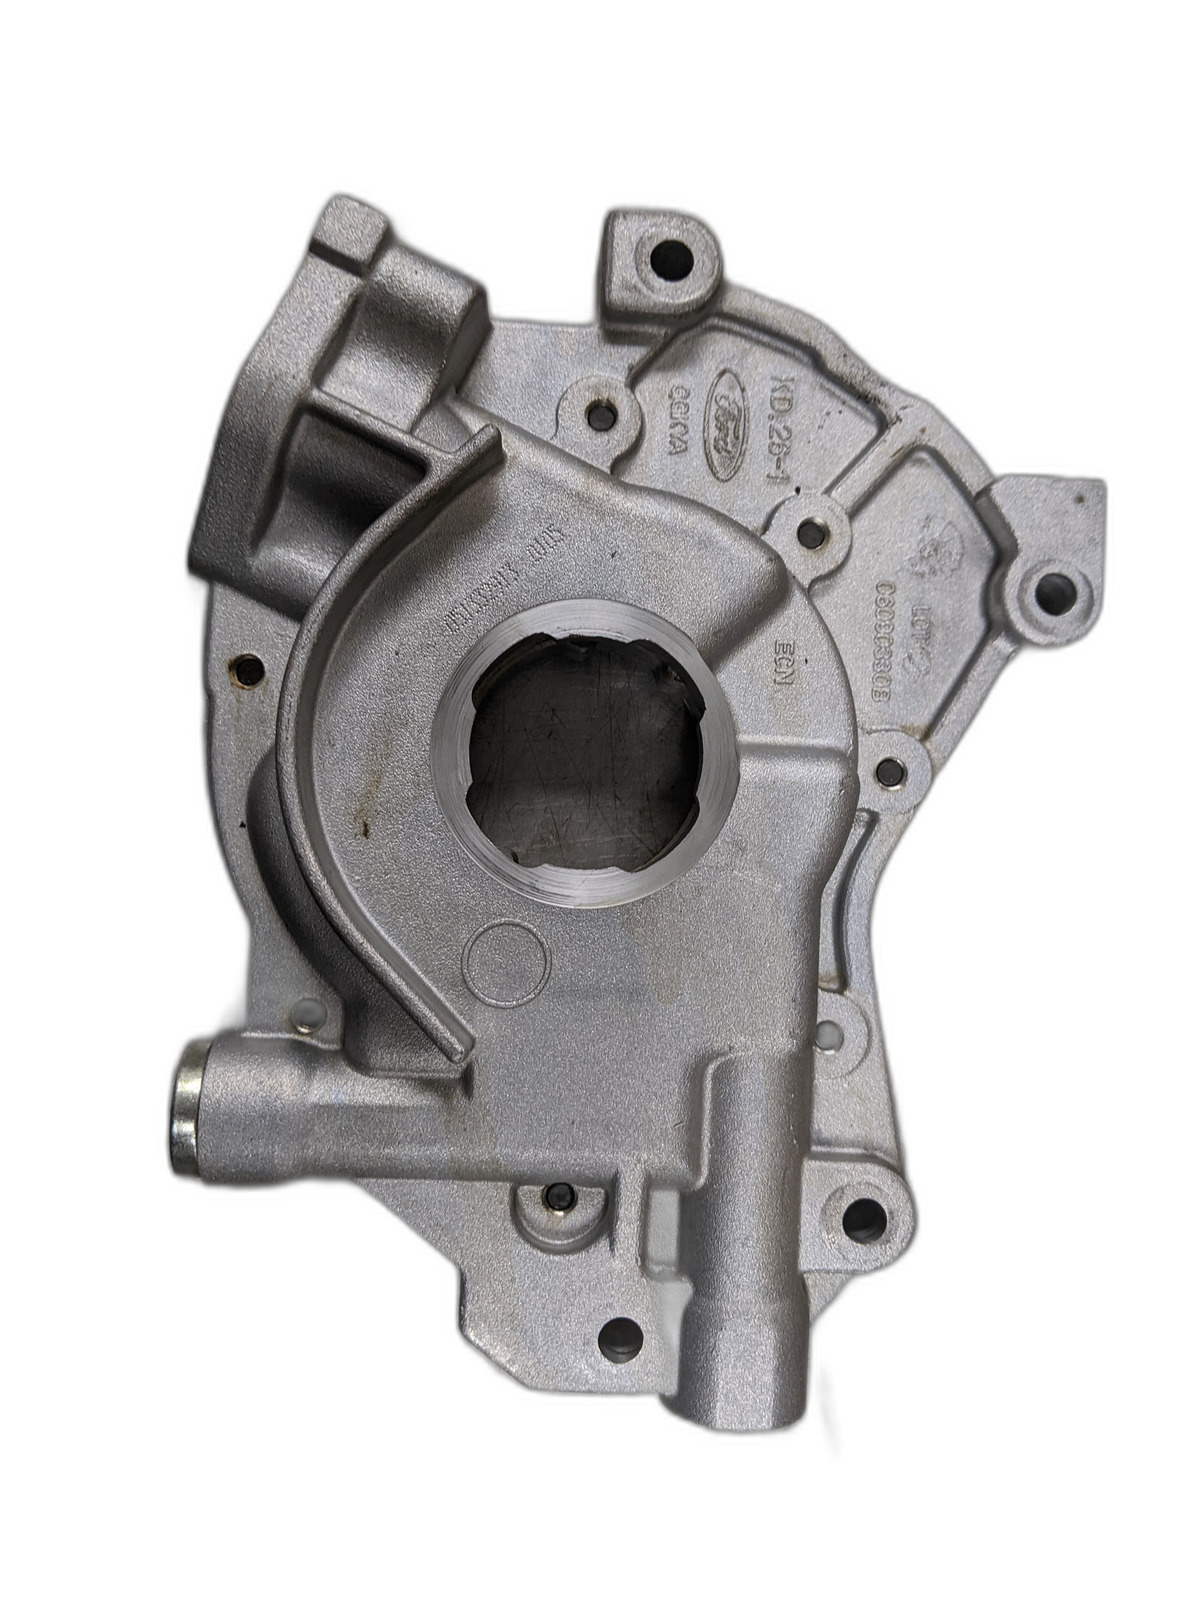 Engine Oil Pump From 2014 Ford E-150  4.6 - $34.95